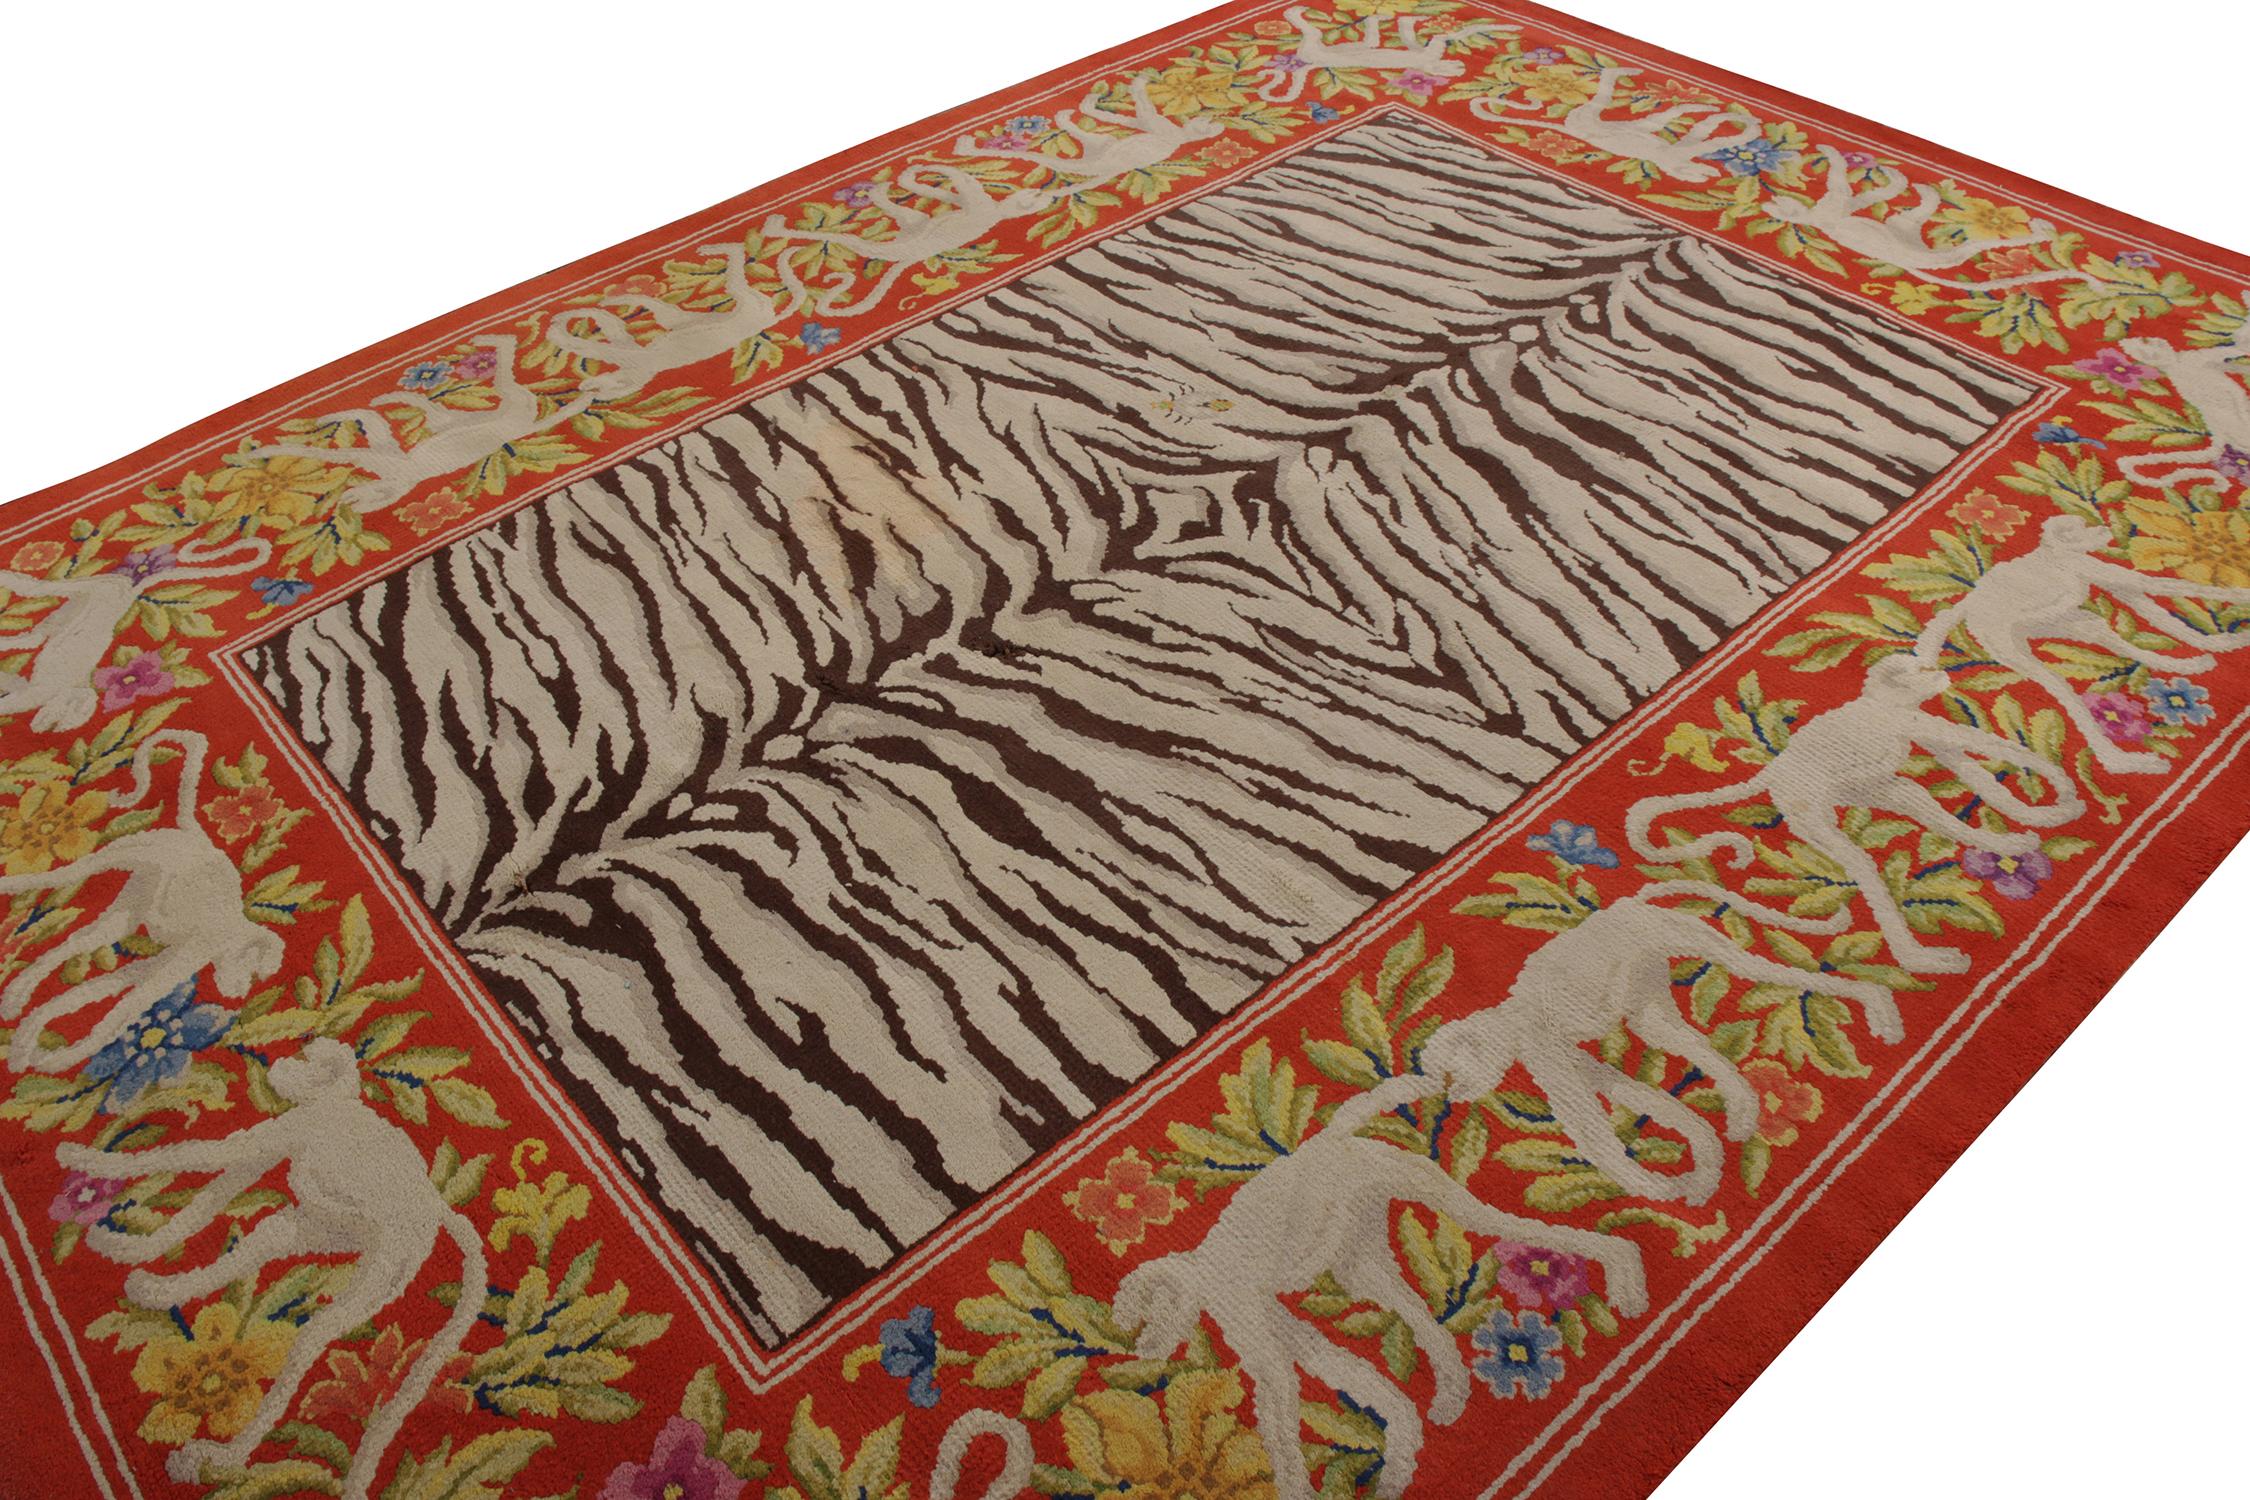 Other Hand-Knotted Vintage Pictorial Rug in Red and Beige Brown Animal Patterns